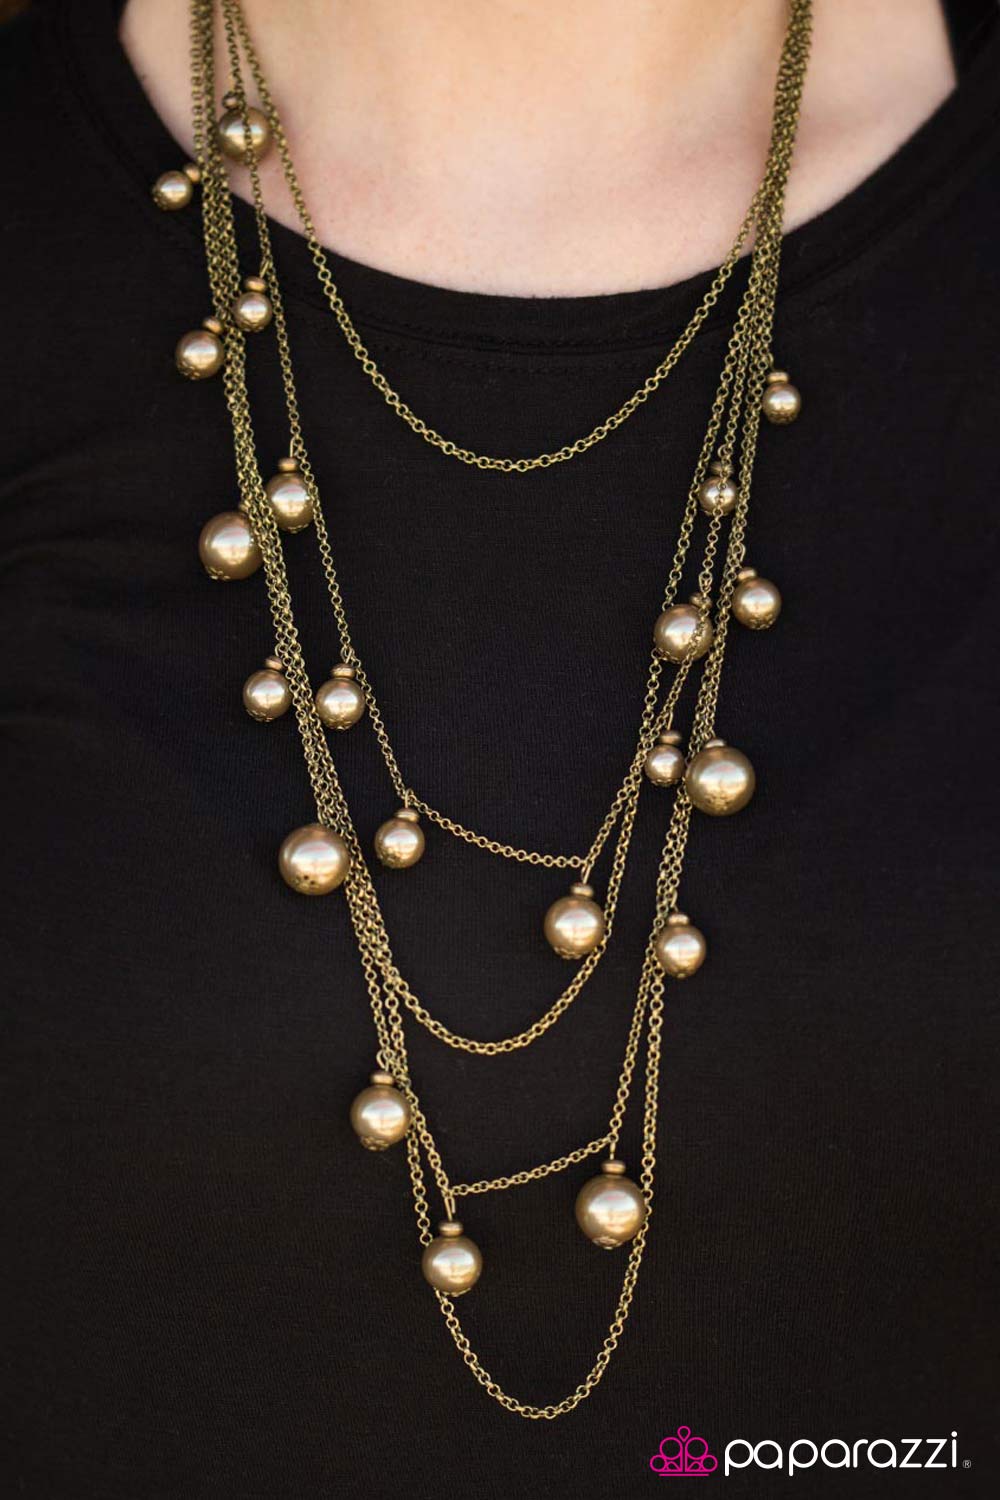 Up Close and Personal - Brass - Paparazzi necklace